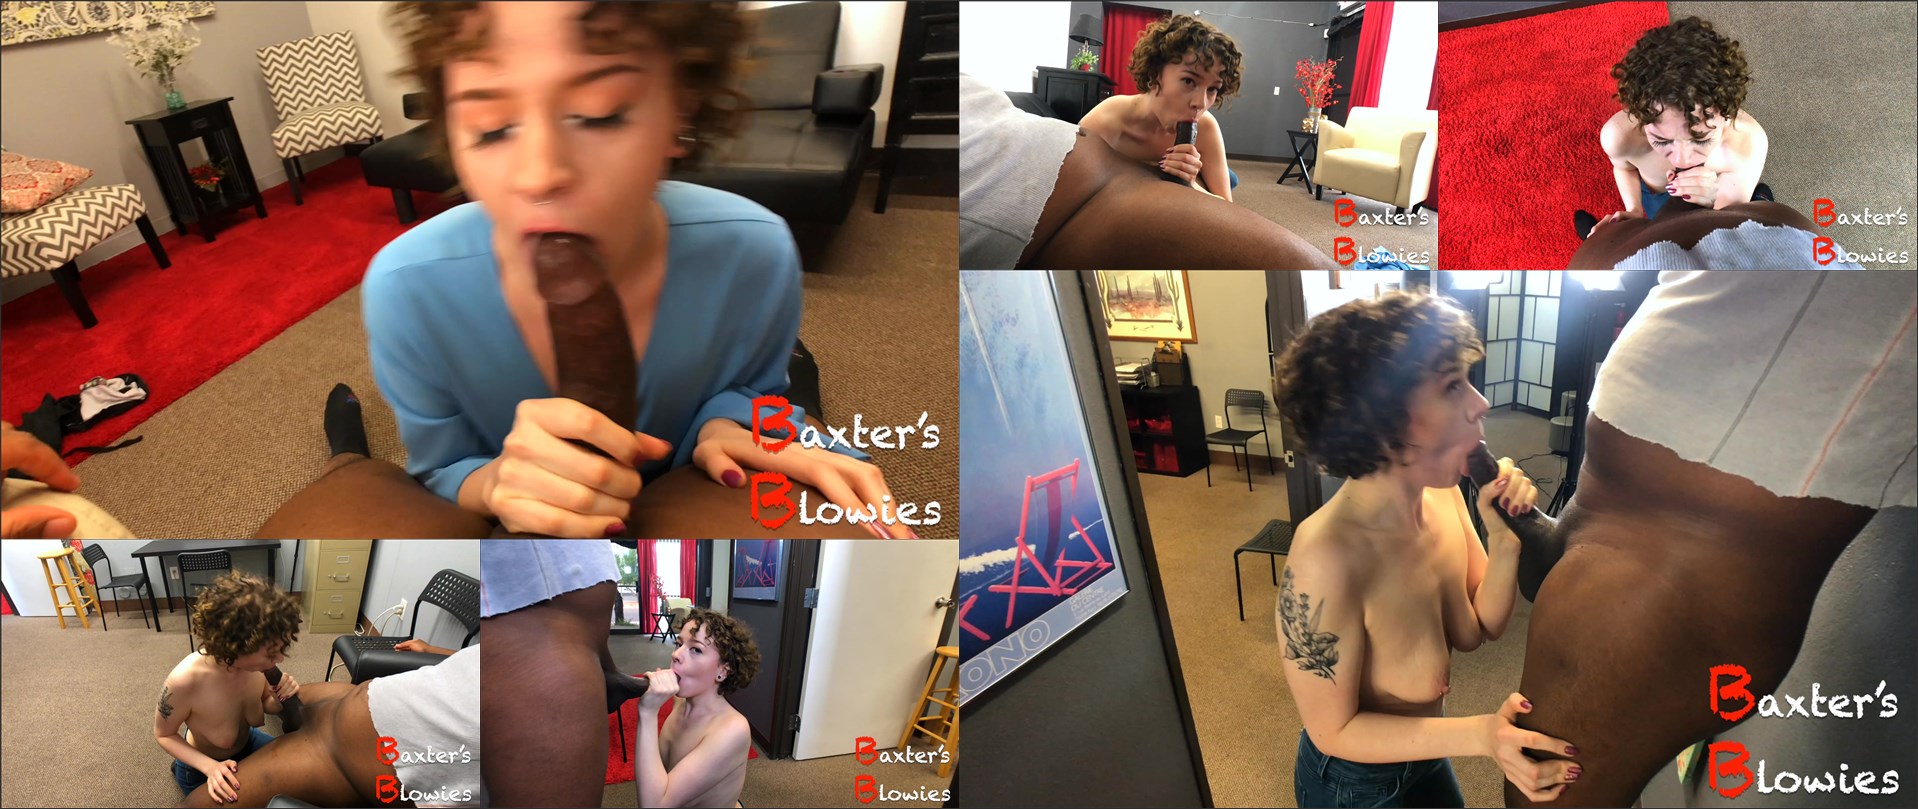 BaxtersBlowies – Curly Hair Cutie Overwhelmed By Cock (Oct 6, 2023)